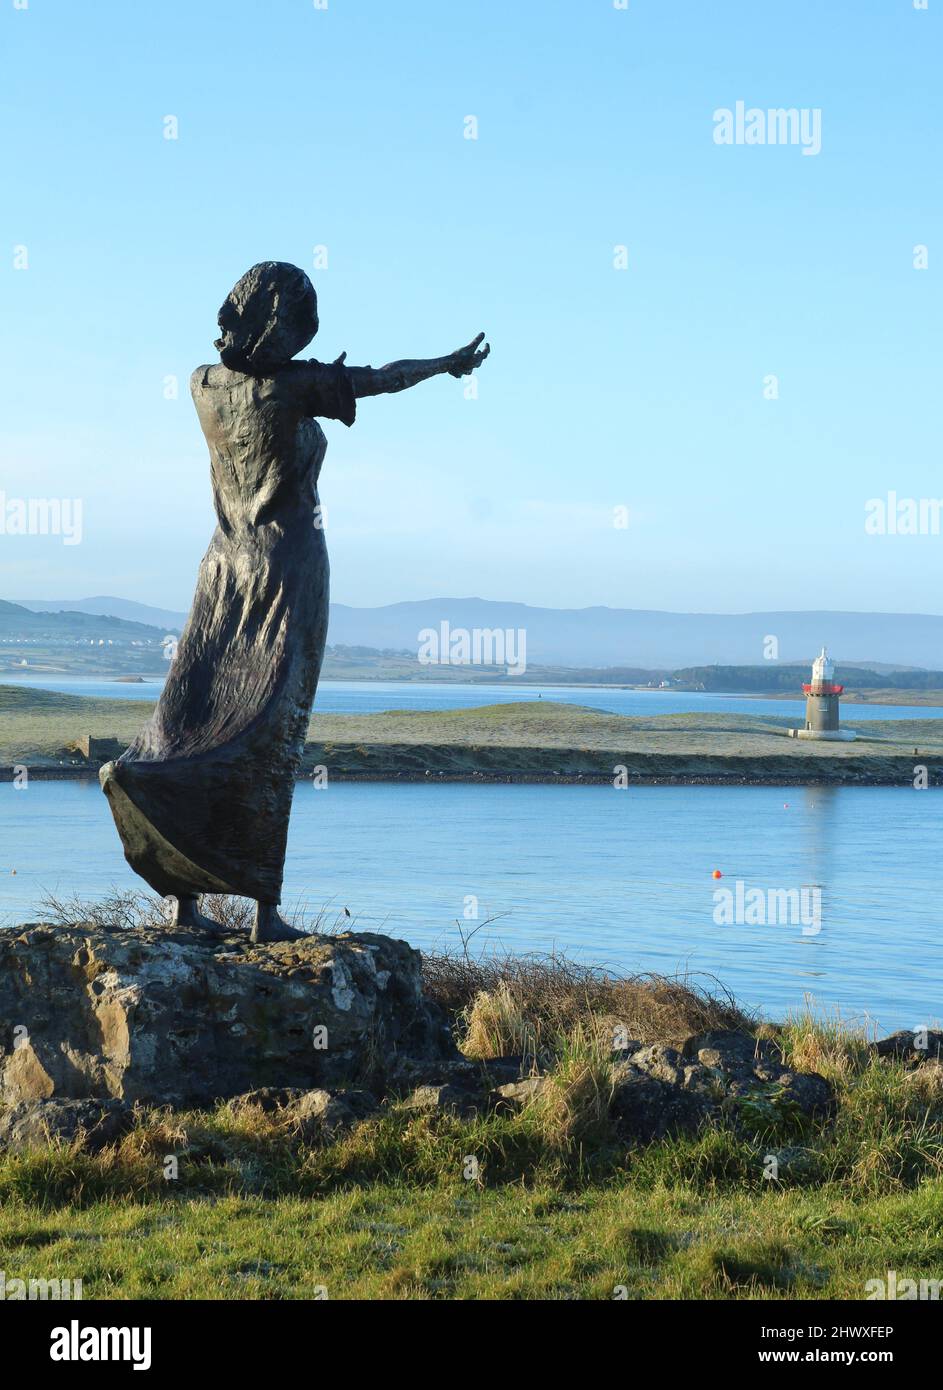 View from  from behind silhouette of statue across channel towards Oyster Island with mountains visible. Rosses Point, Slgo, Ireland Stock Photo